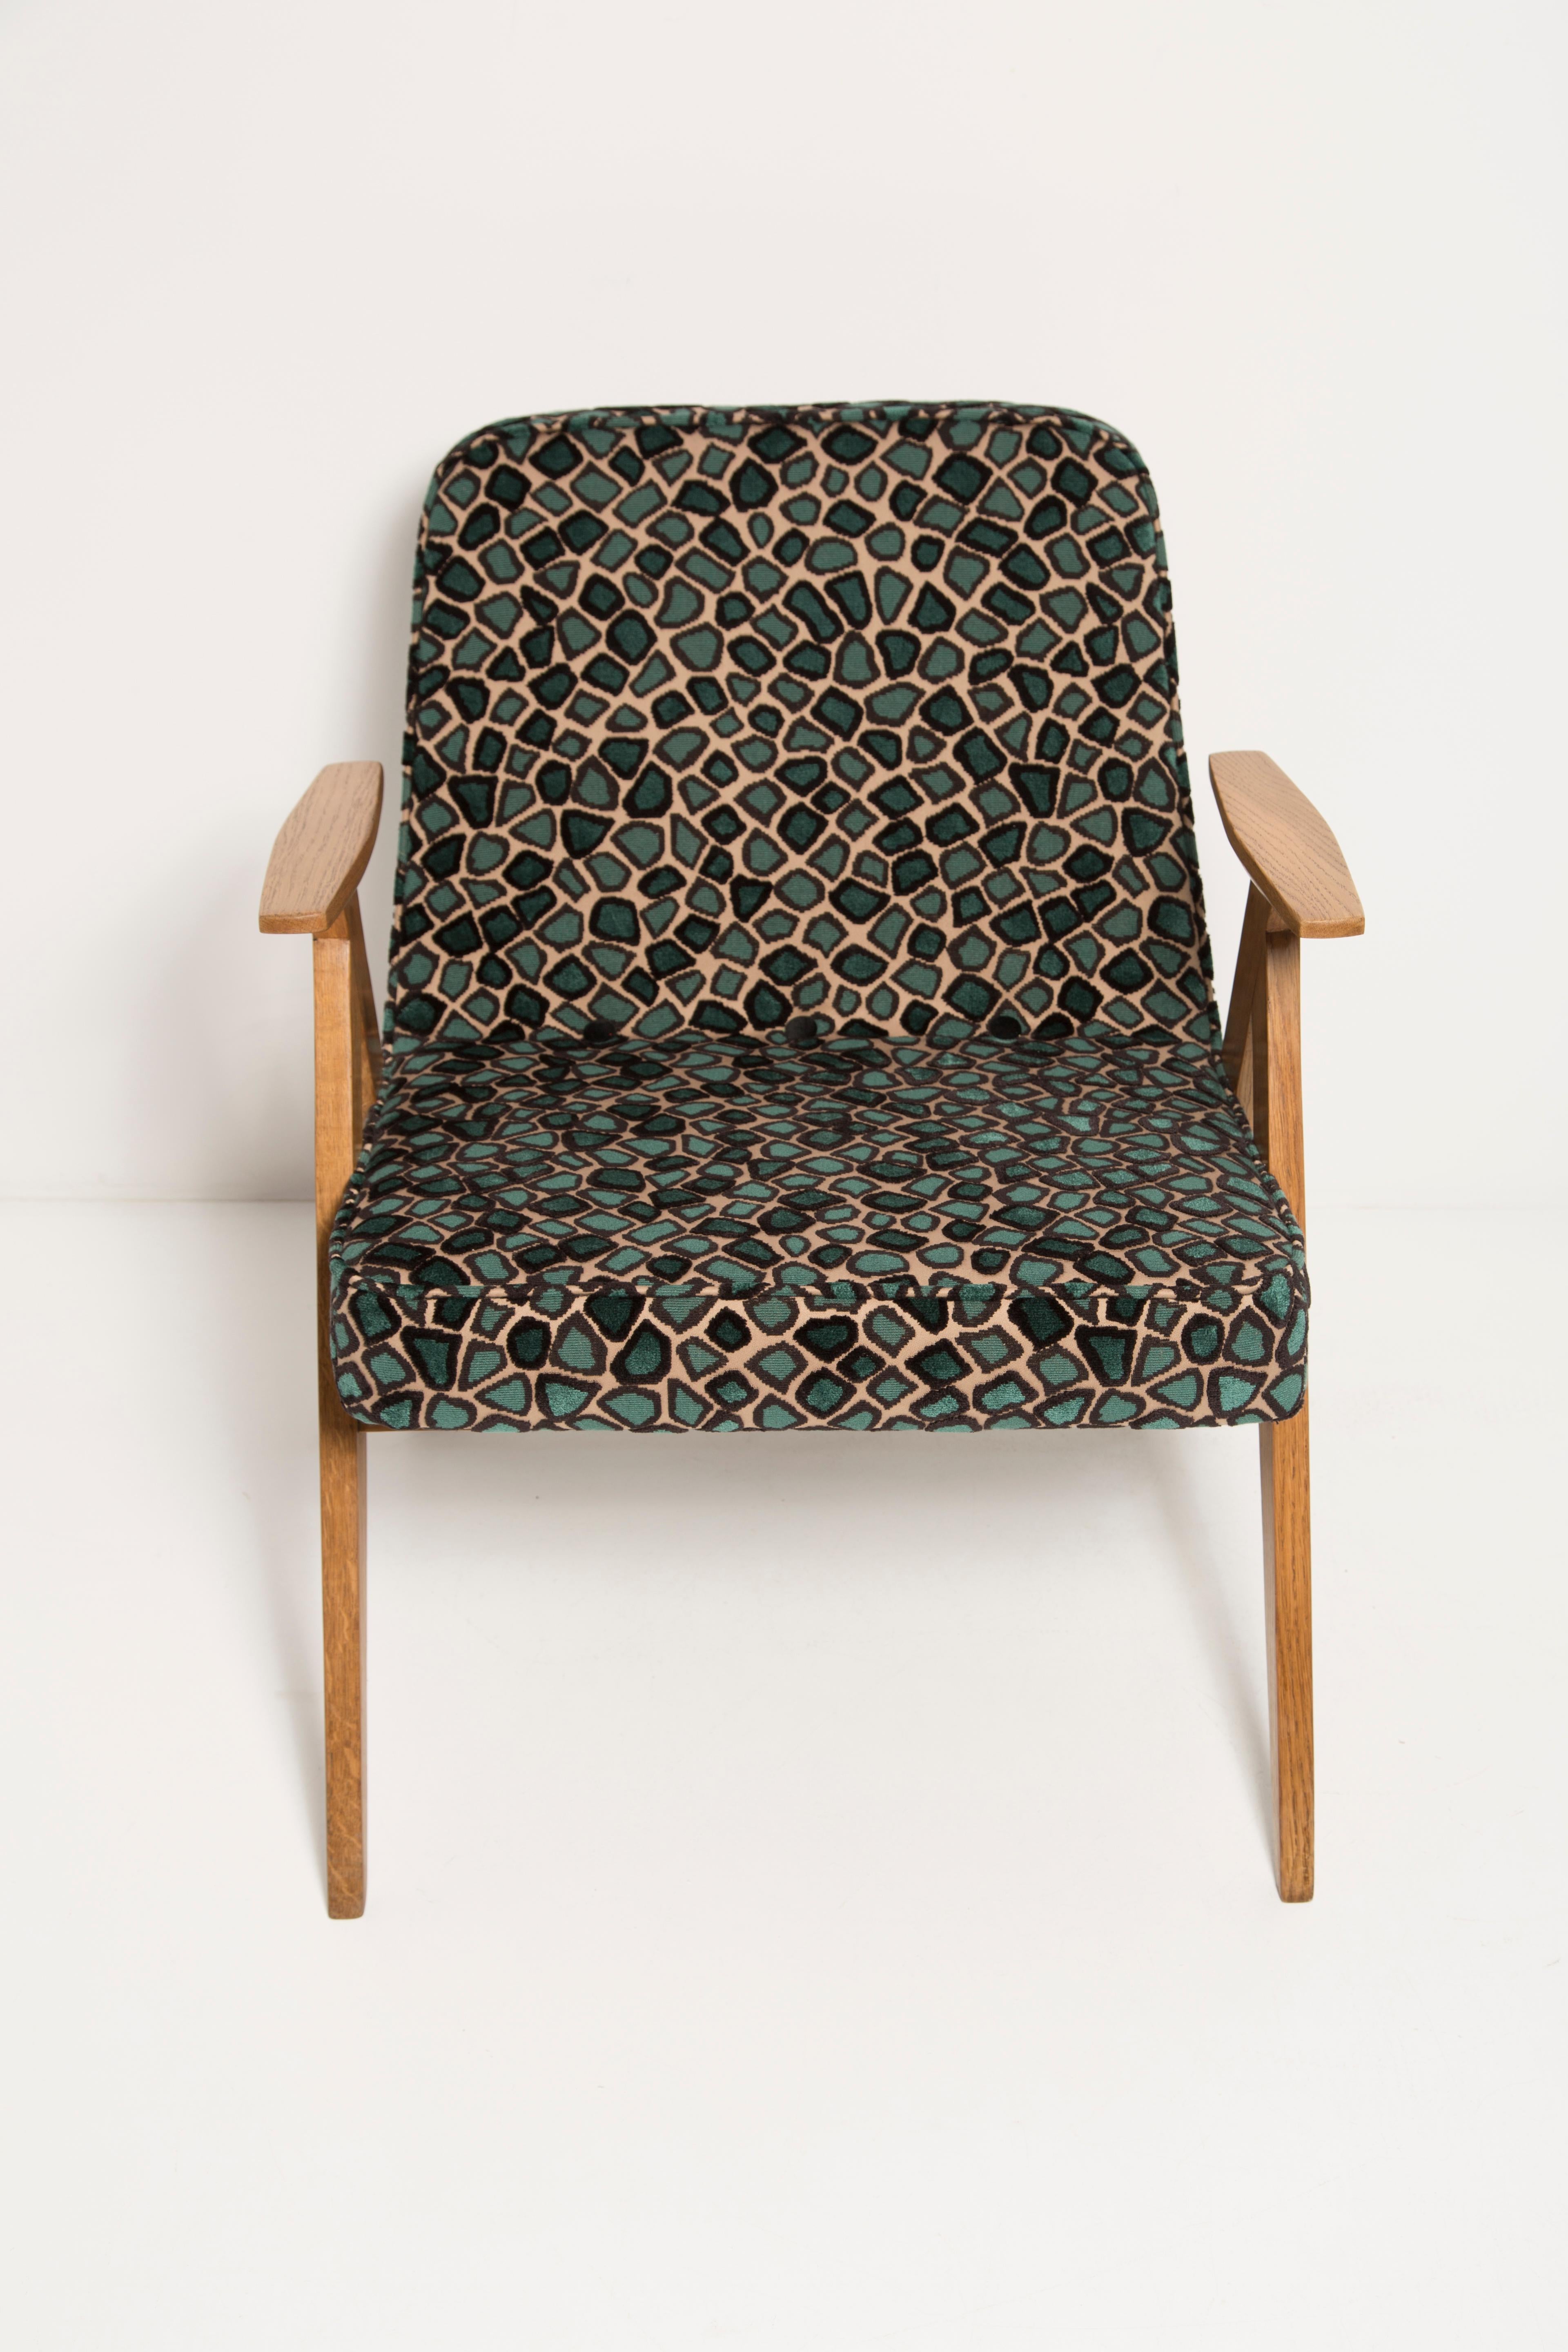 Two Mid Century 366 Armchairs in Leopard Velvet, by Chierowski, Europe, 1960s For Sale 1